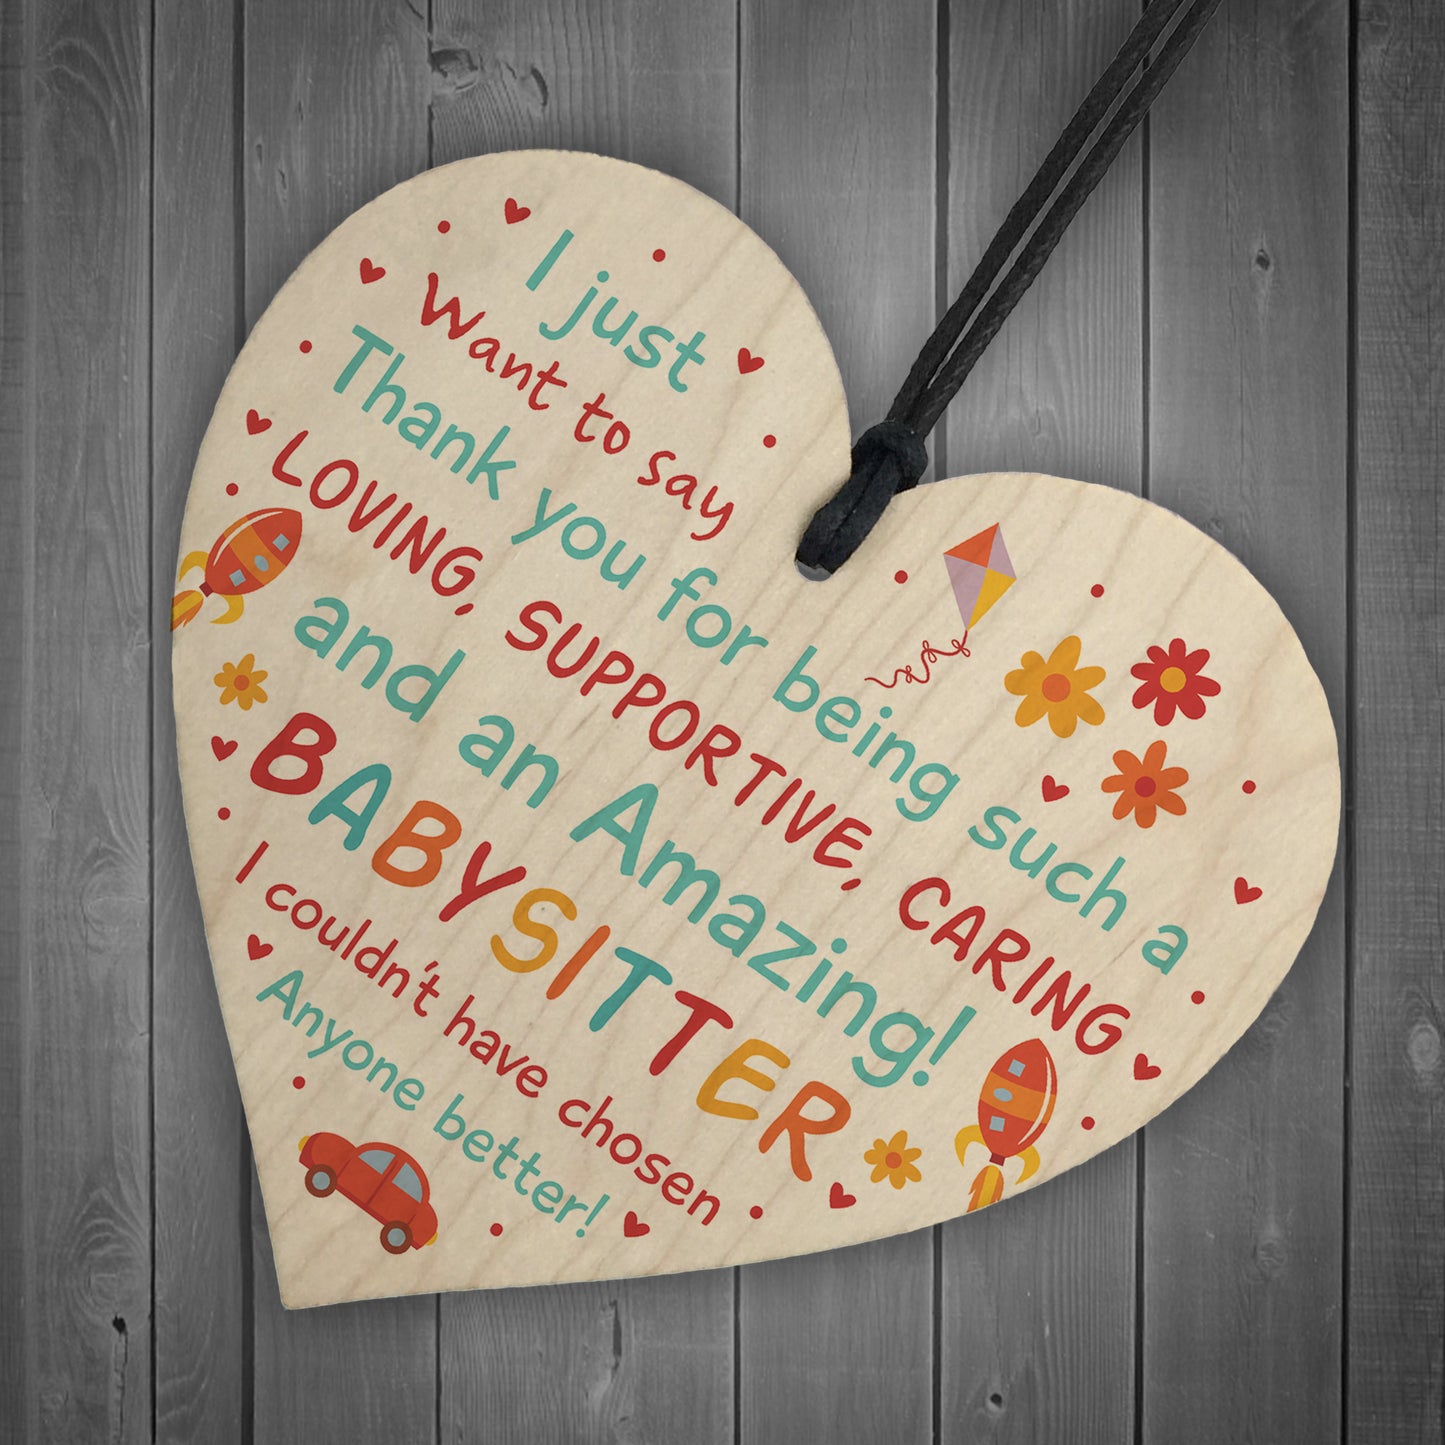 Babysitter Thank You Gifts Wooden Heart Gift For Childminder